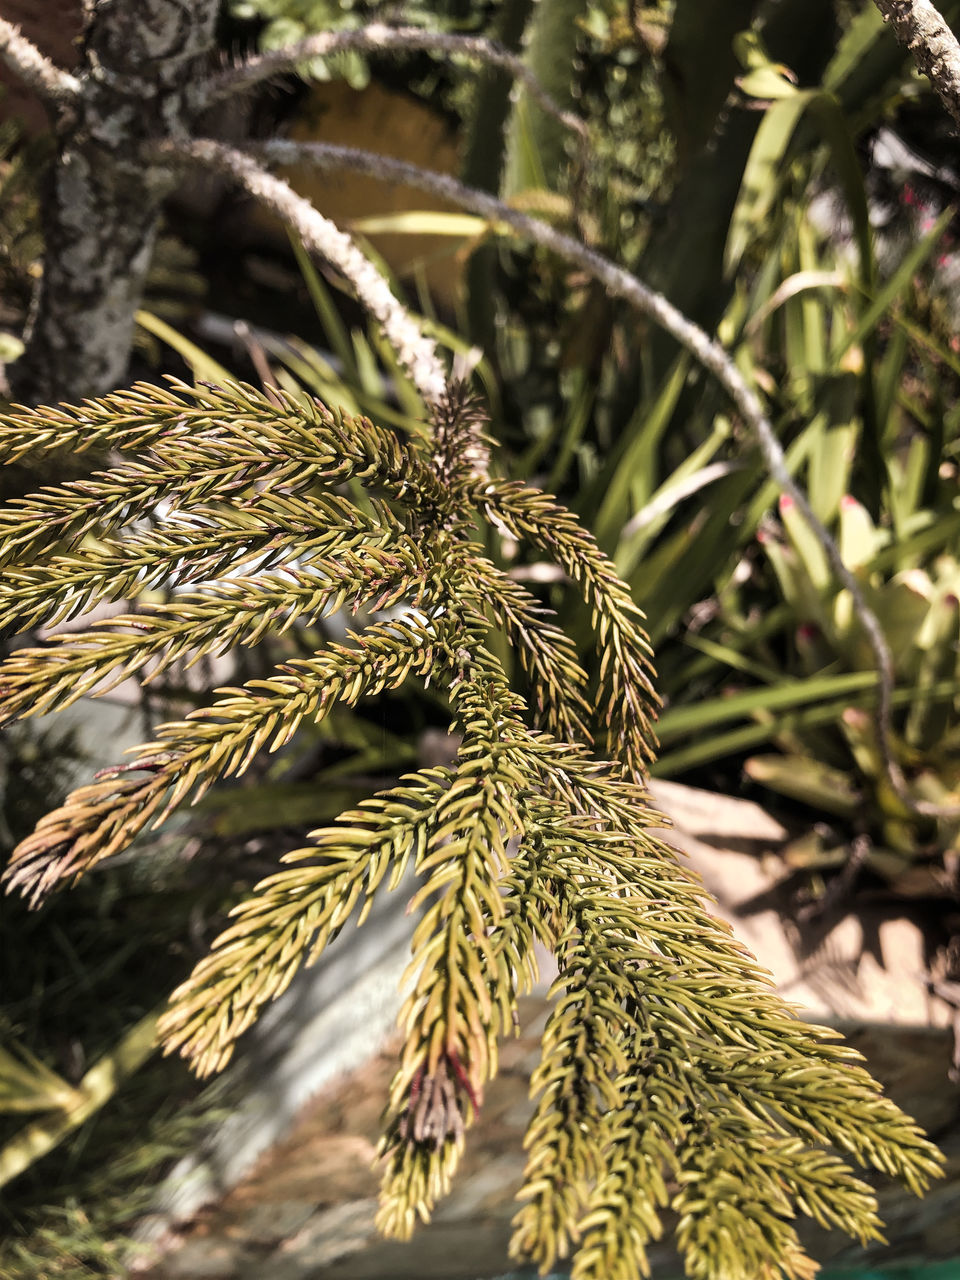 plant, growth, close-up, day, green color, beauty in nature, focus on foreground, no people, leaf, nature, plant part, tree, outdoors, sunlight, selective focus, branch, tranquility, needle - plant part, pine tree, coniferous tree